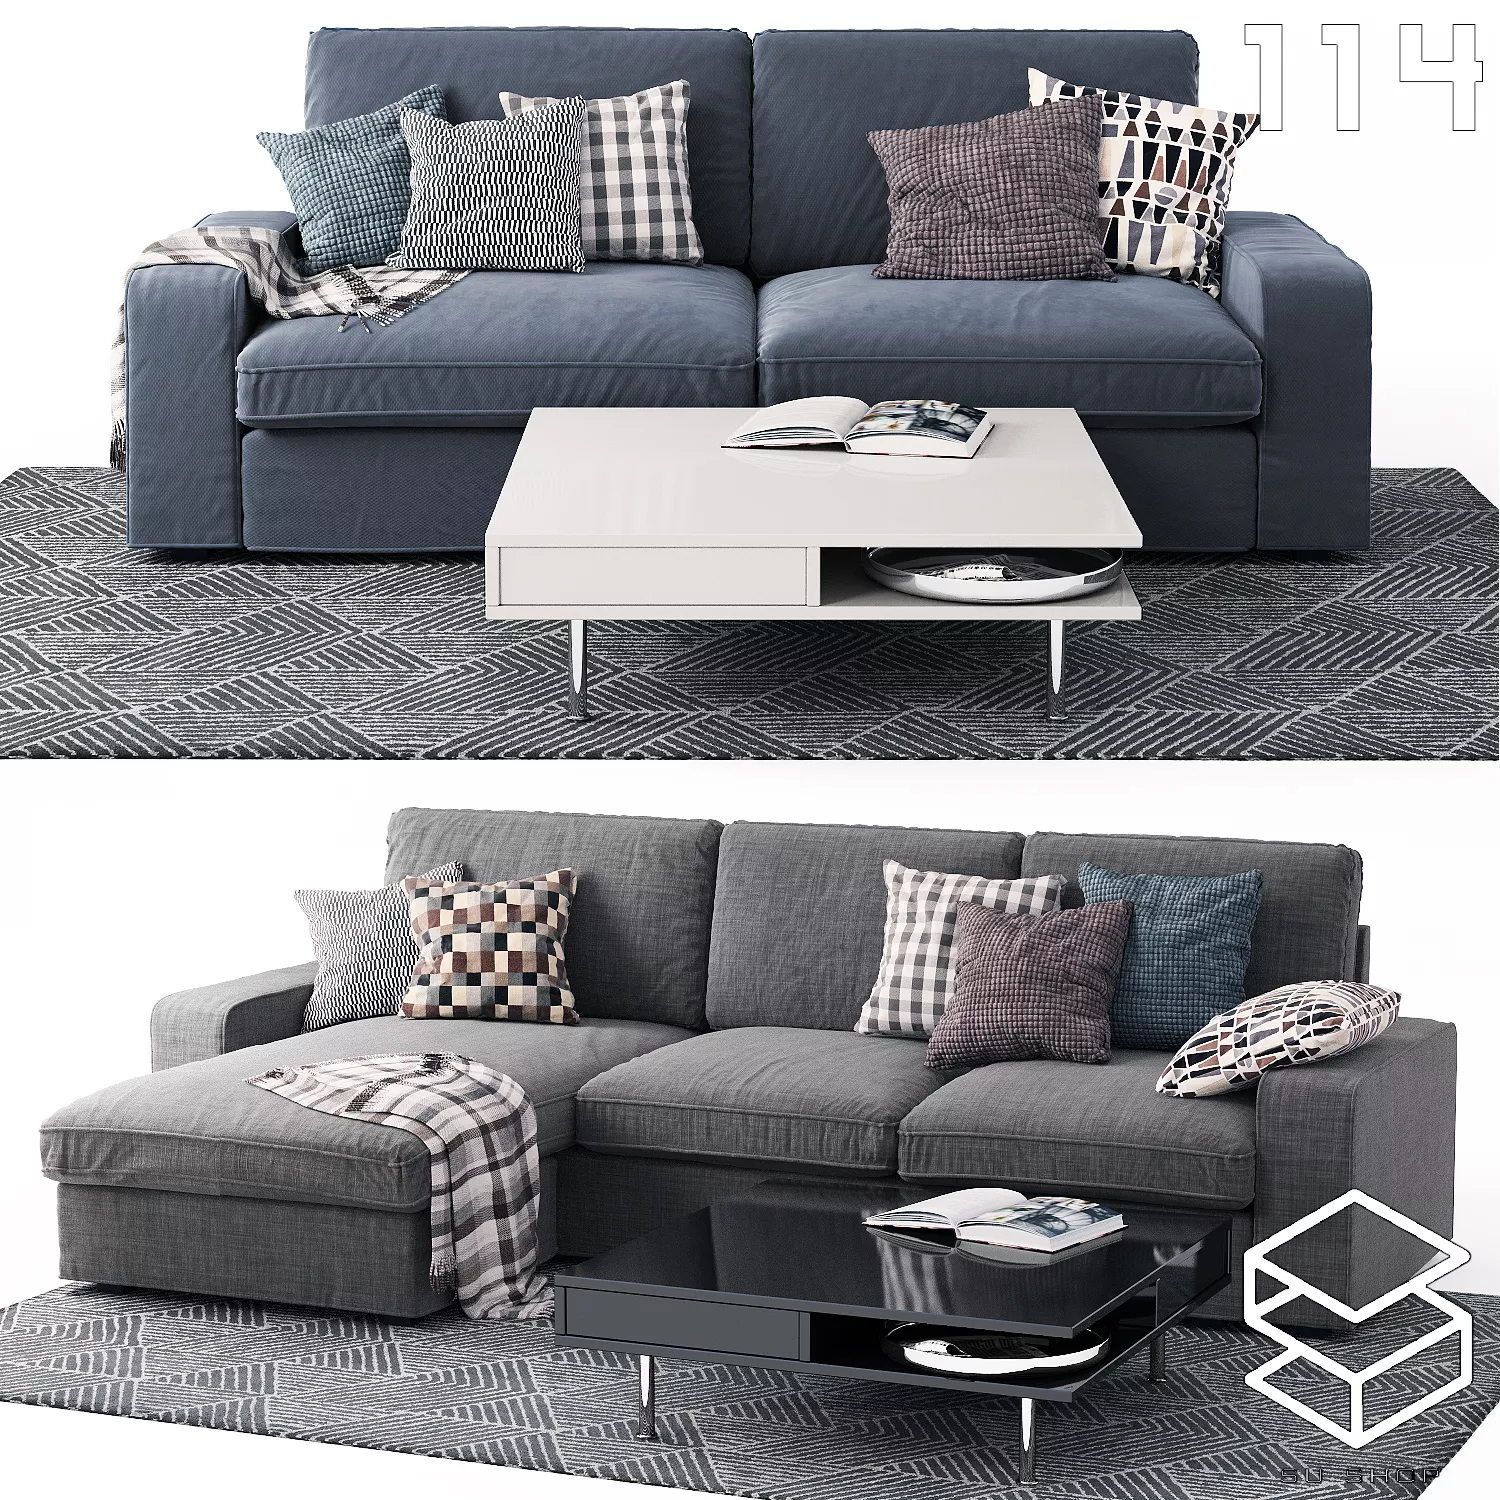 MODERN SOFA - SKETCHUP 3D MODEL - VRAY OR ENSCAPE - ID13402